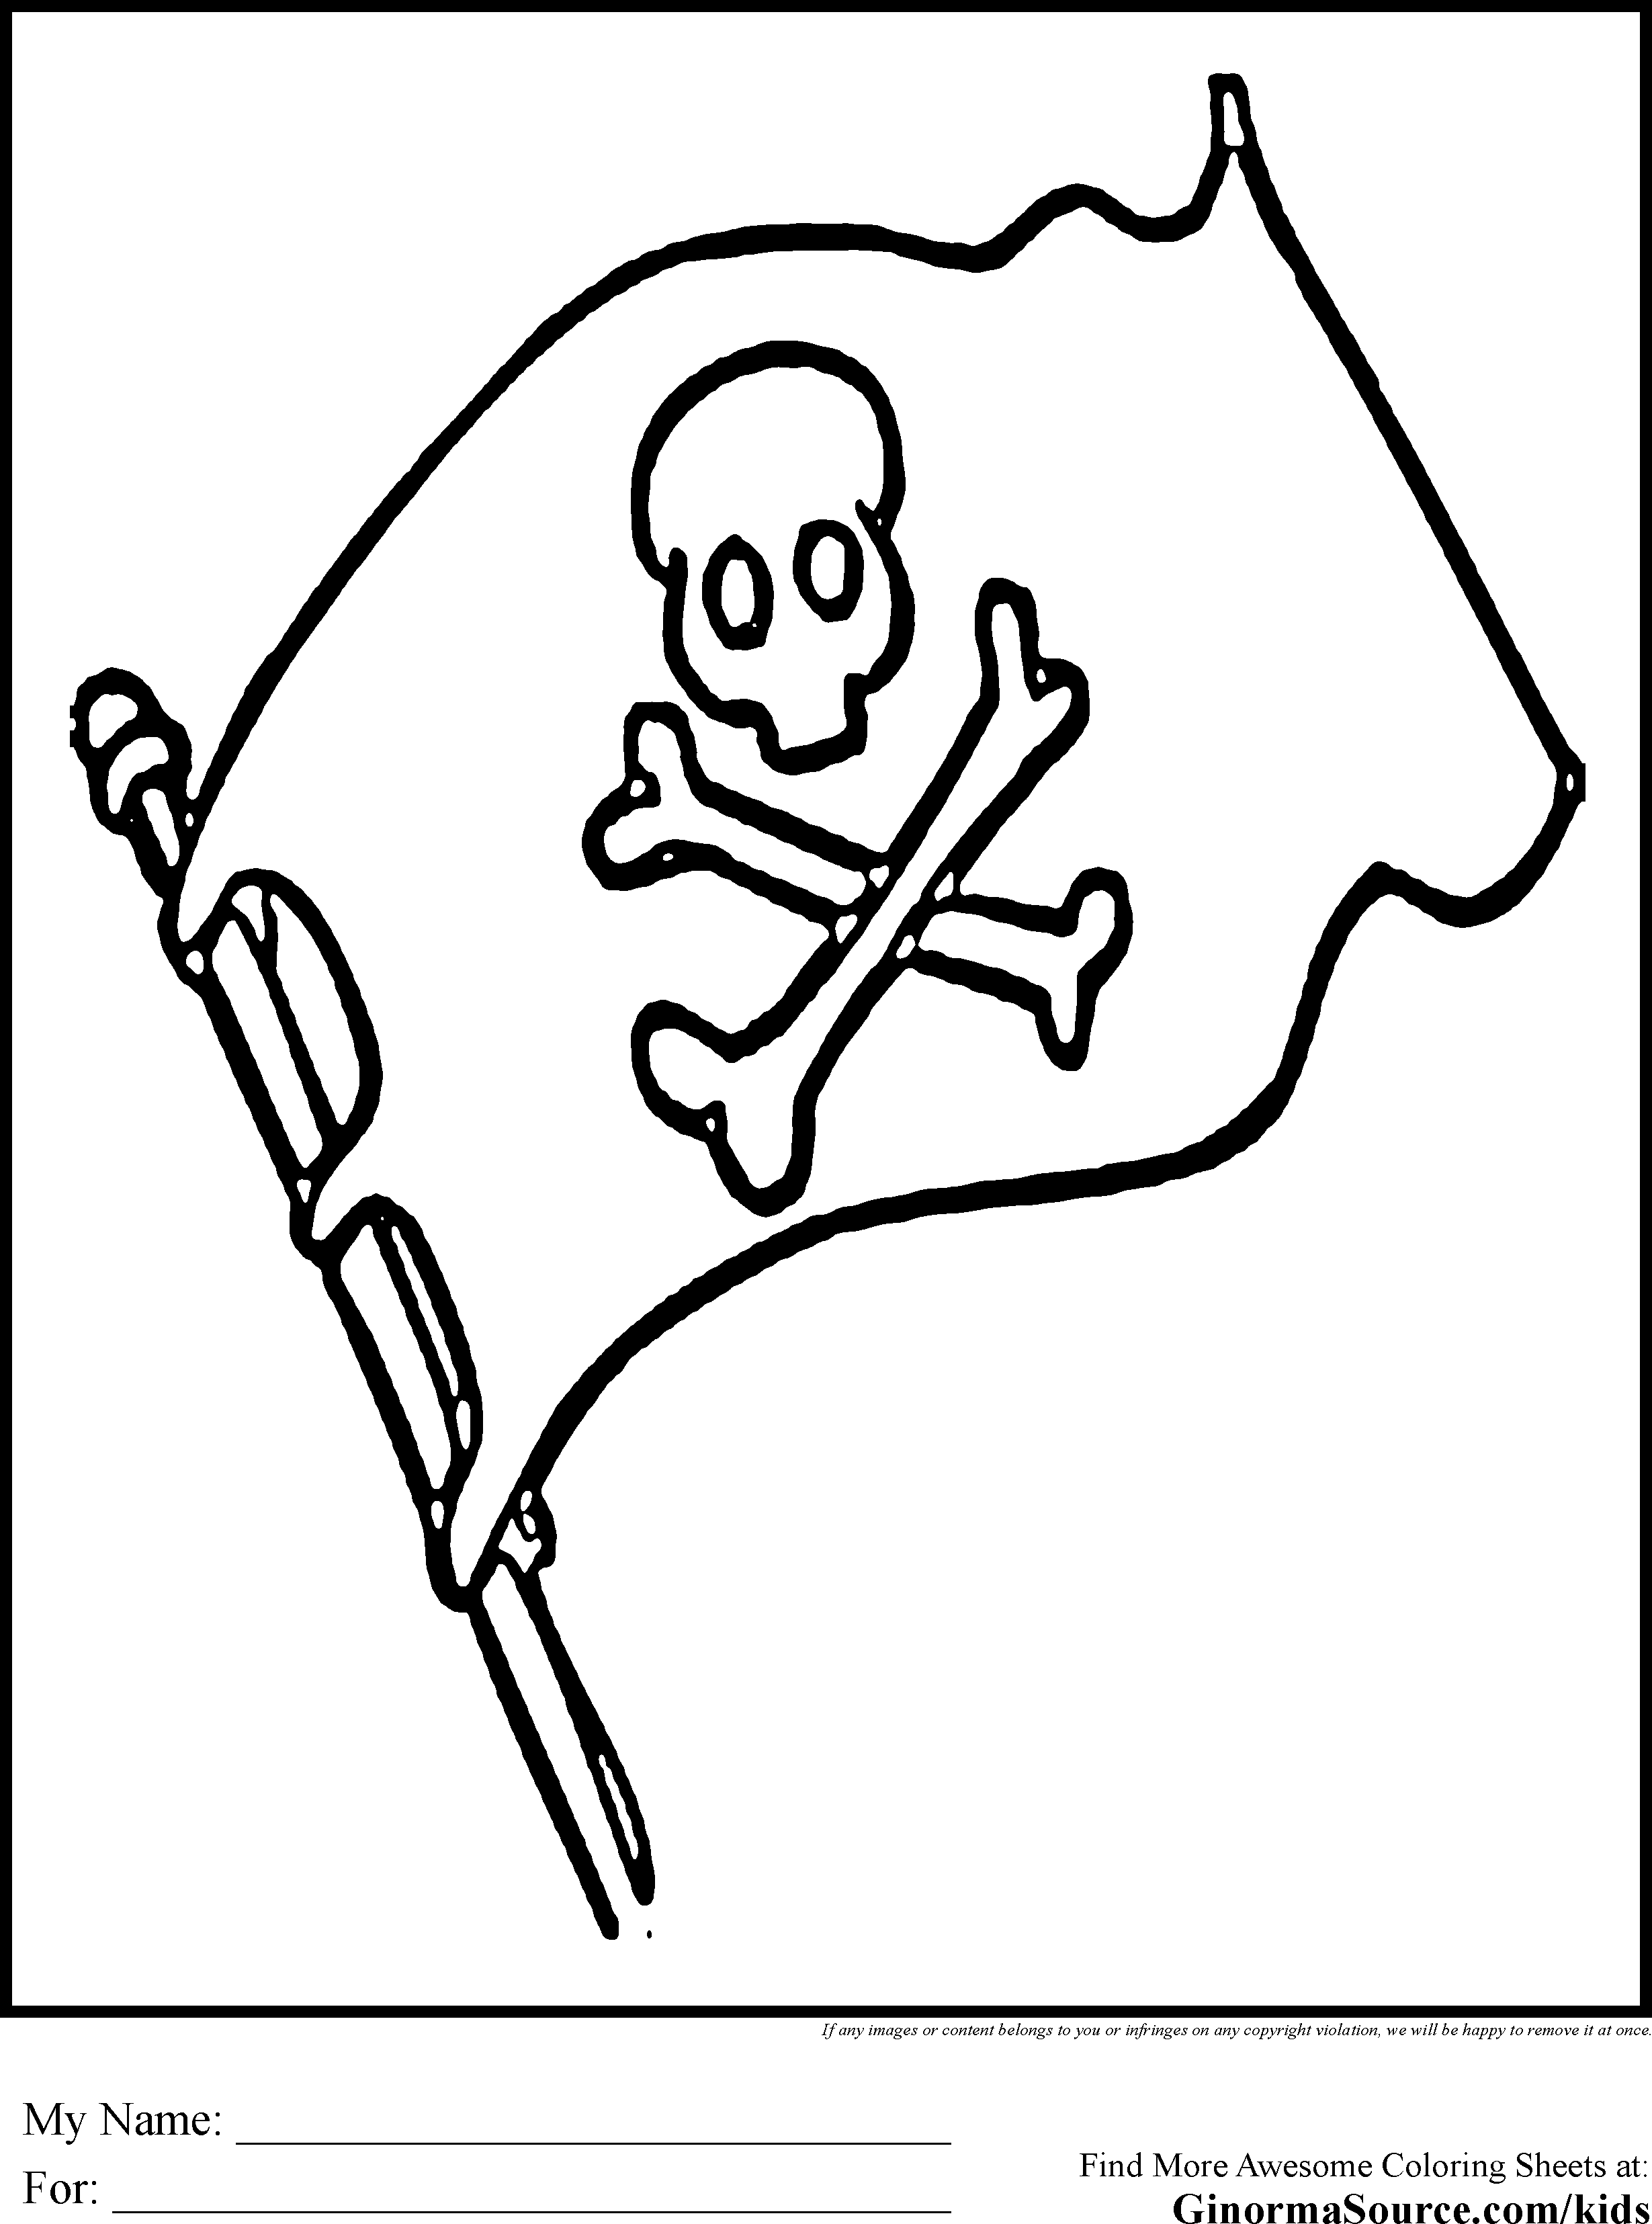 6 Pics of Pirate Flag Coloring Page - Flag Pirate Ship Coloring ...